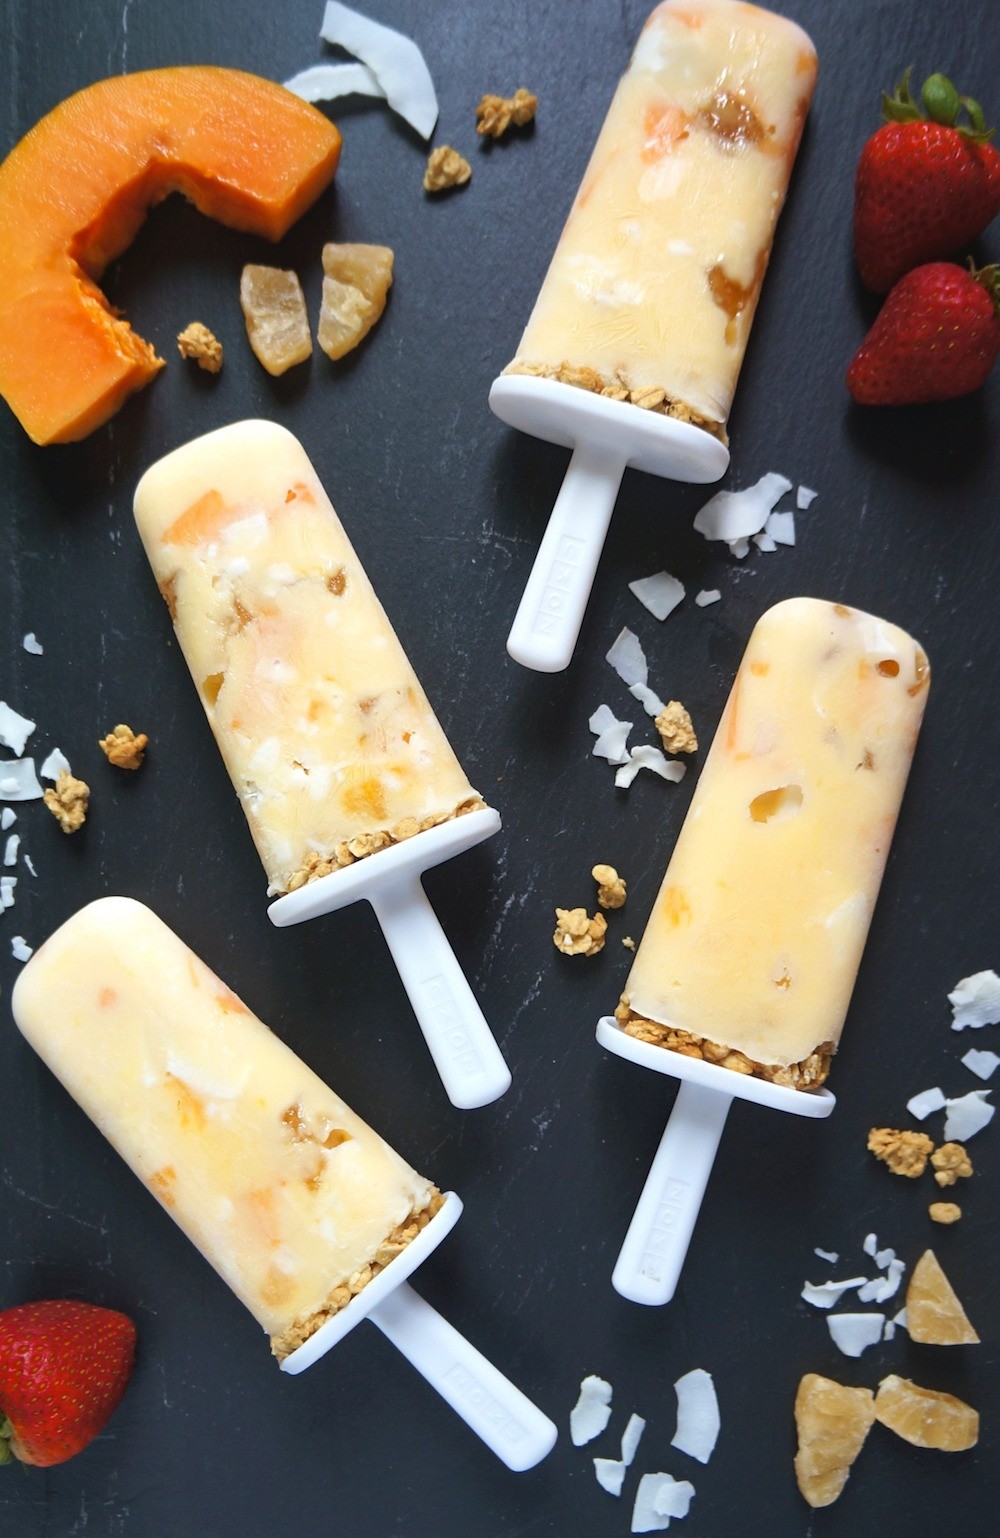 Cool Off With These Easy Homemade Tropical Frozen Yogurt Popsicles!